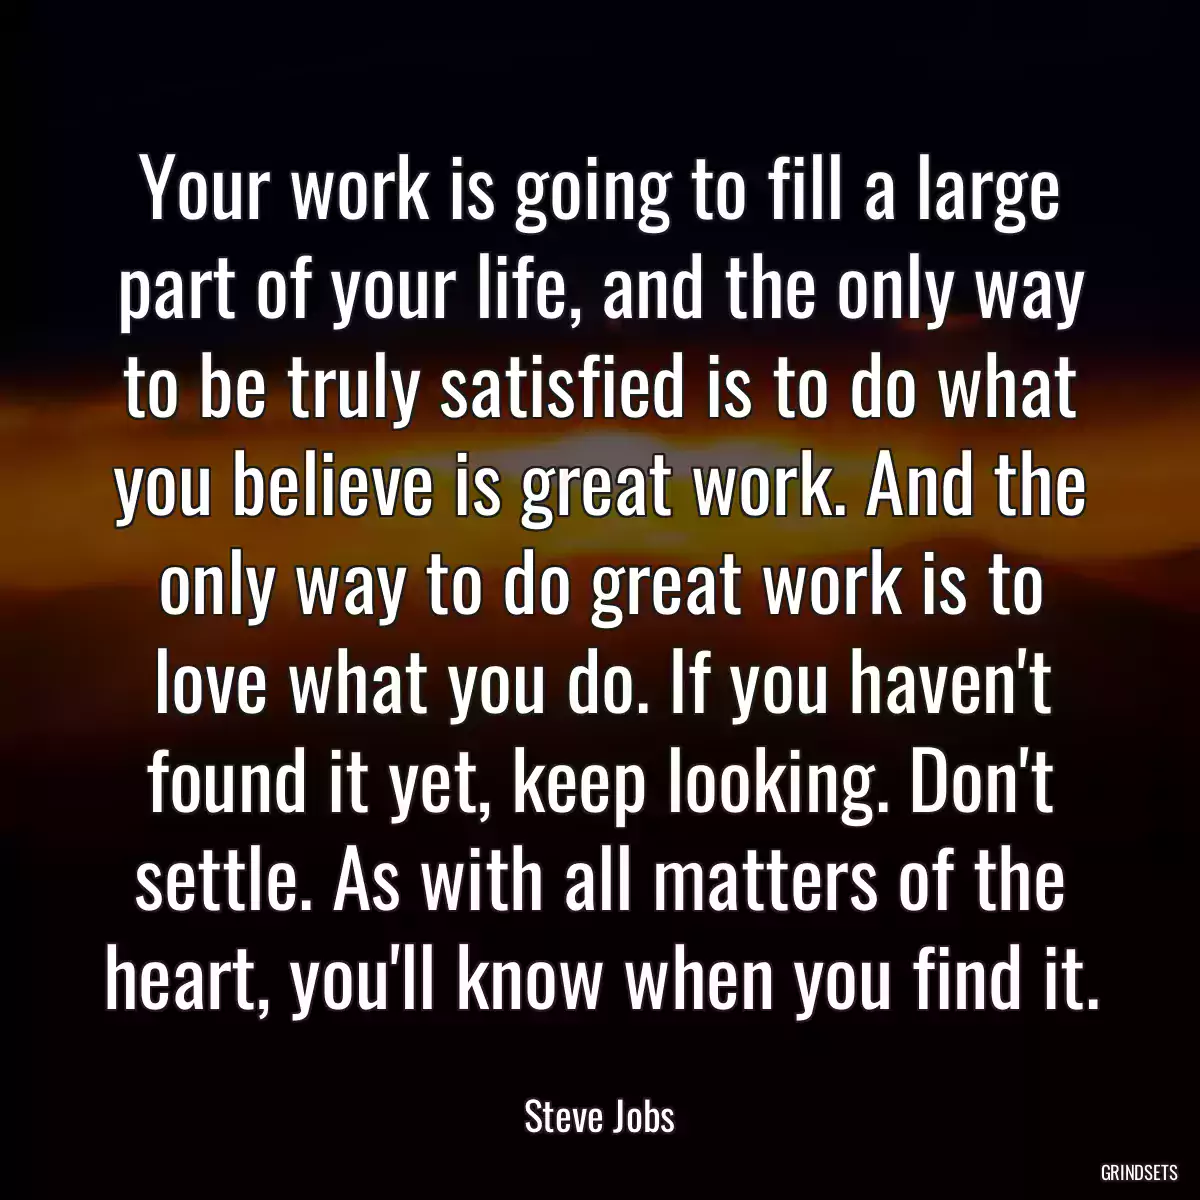 Your work is going to fill a large part of your life, and the only way to be truly satisfied is to do what you believe is great work. And the only way to do great work is to love what you do. If you haven\'t found it yet, keep looking. Don\'t settle. As with all matters of the heart, you\'ll know when you find it.